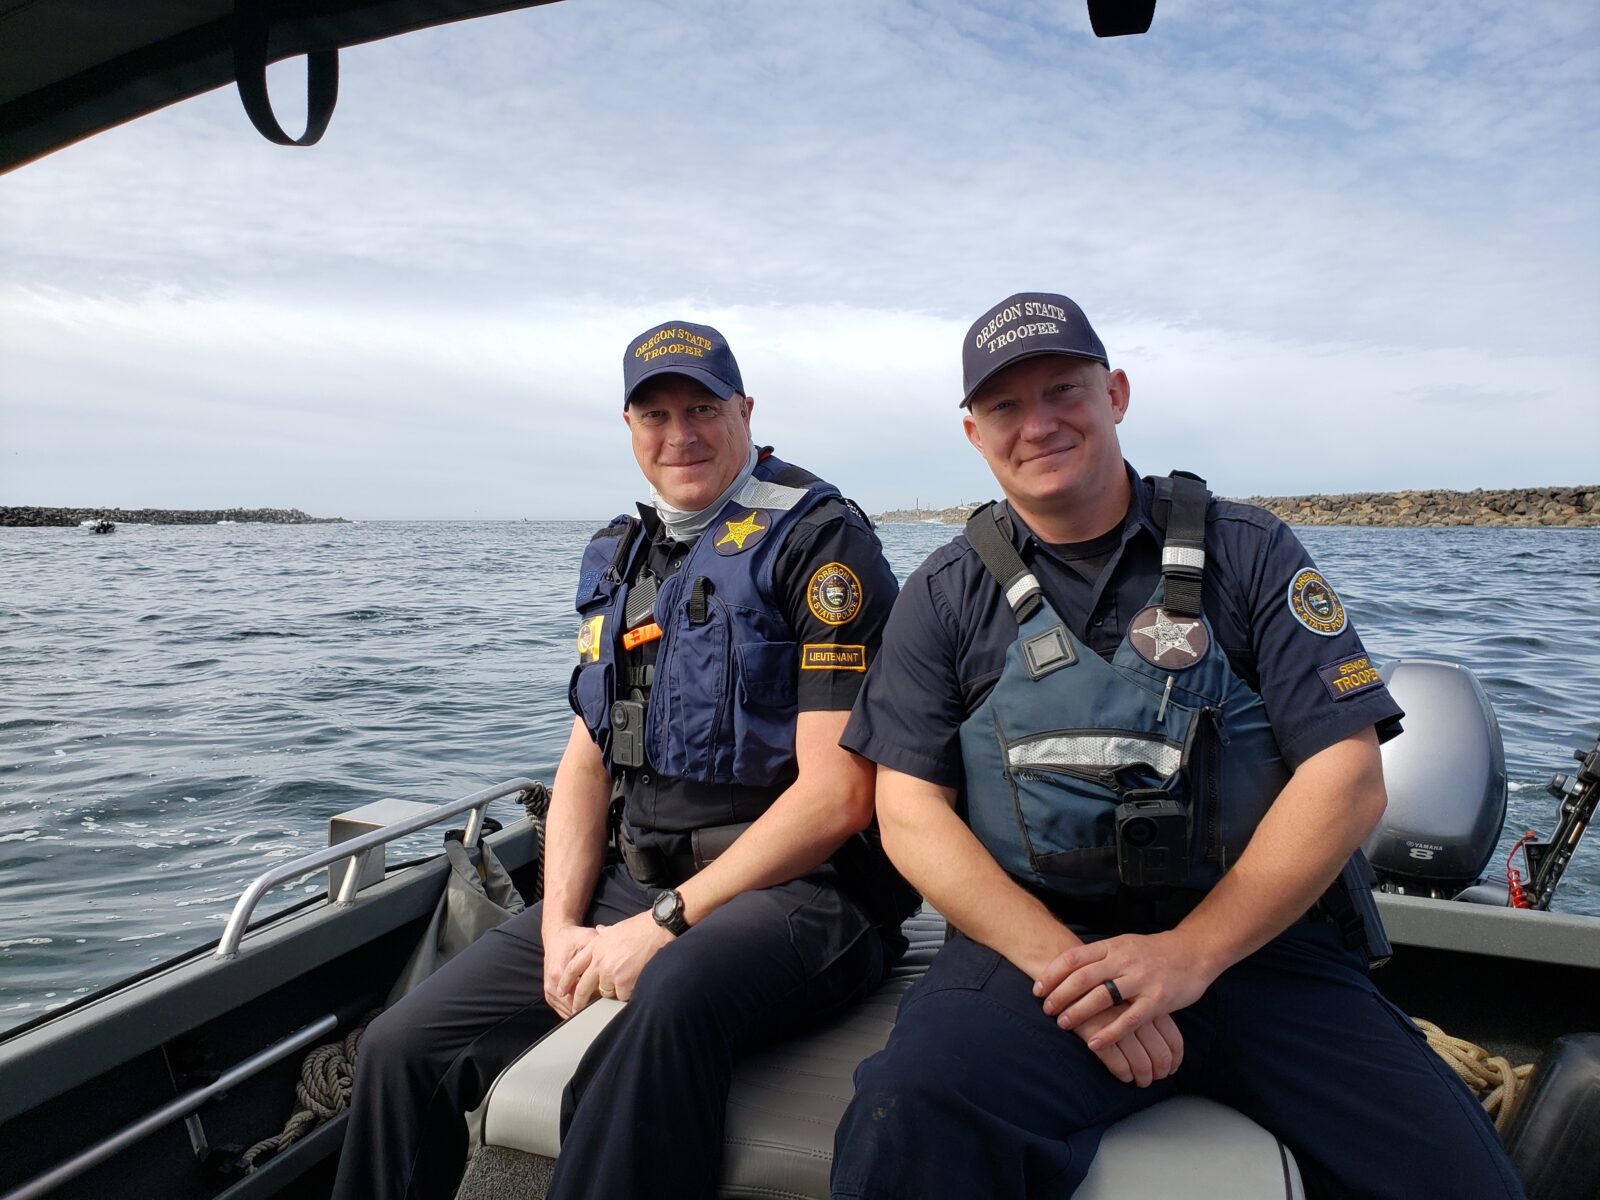 Two Oregon state troopers pose for a photo on a boat.